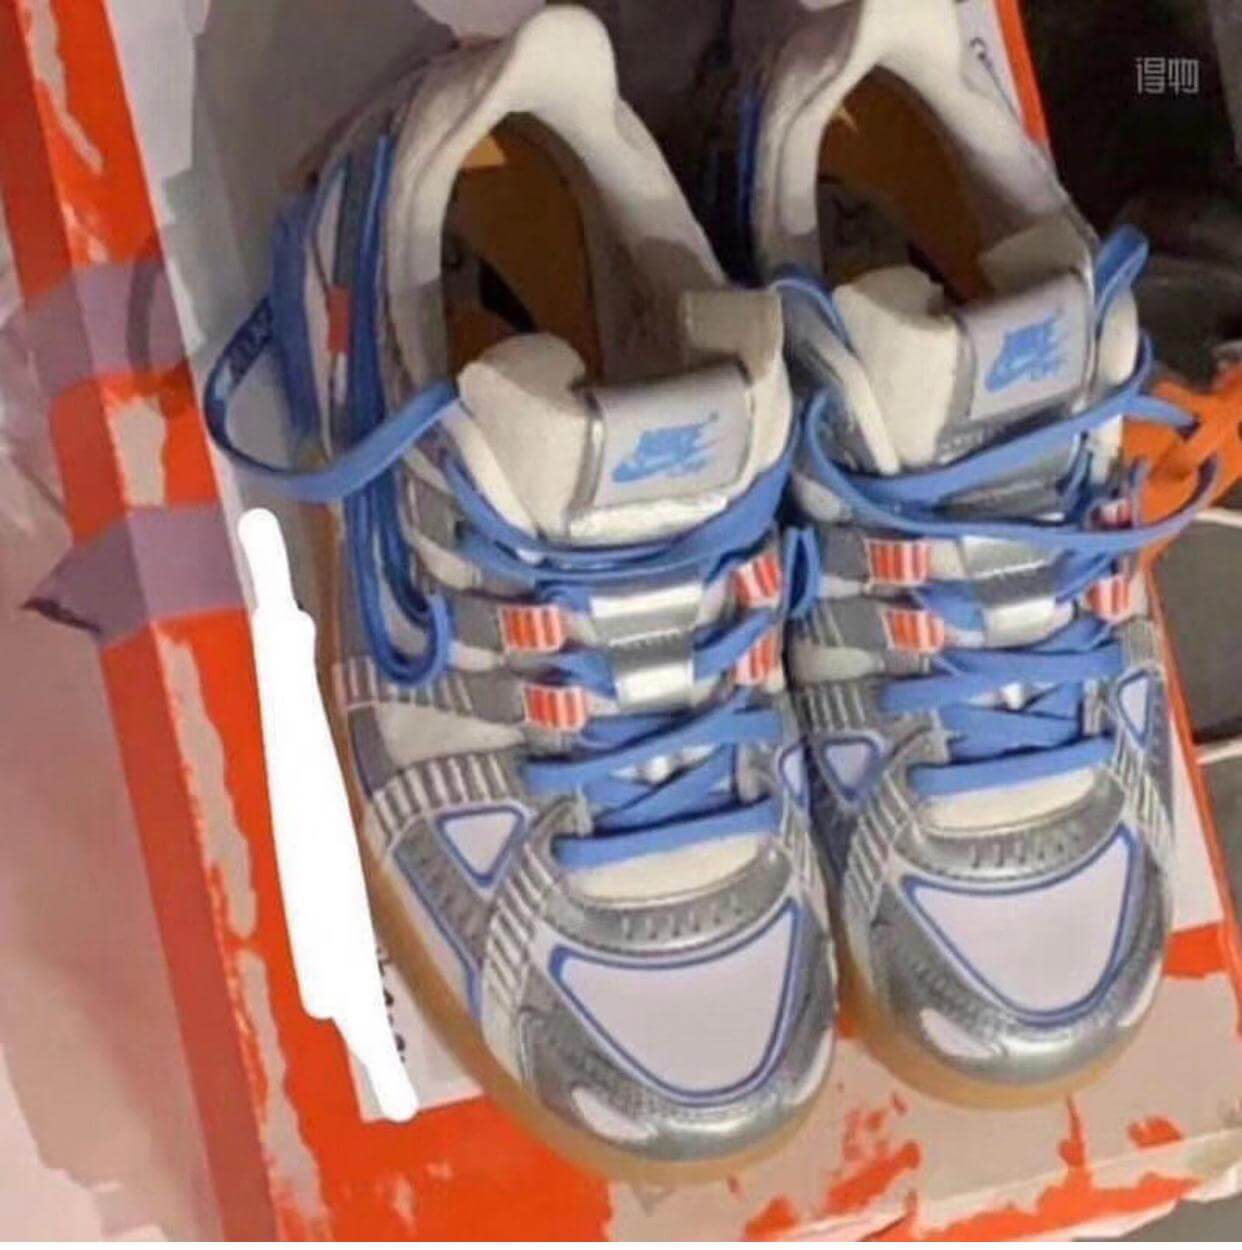 nike rubber dunk x off white unc